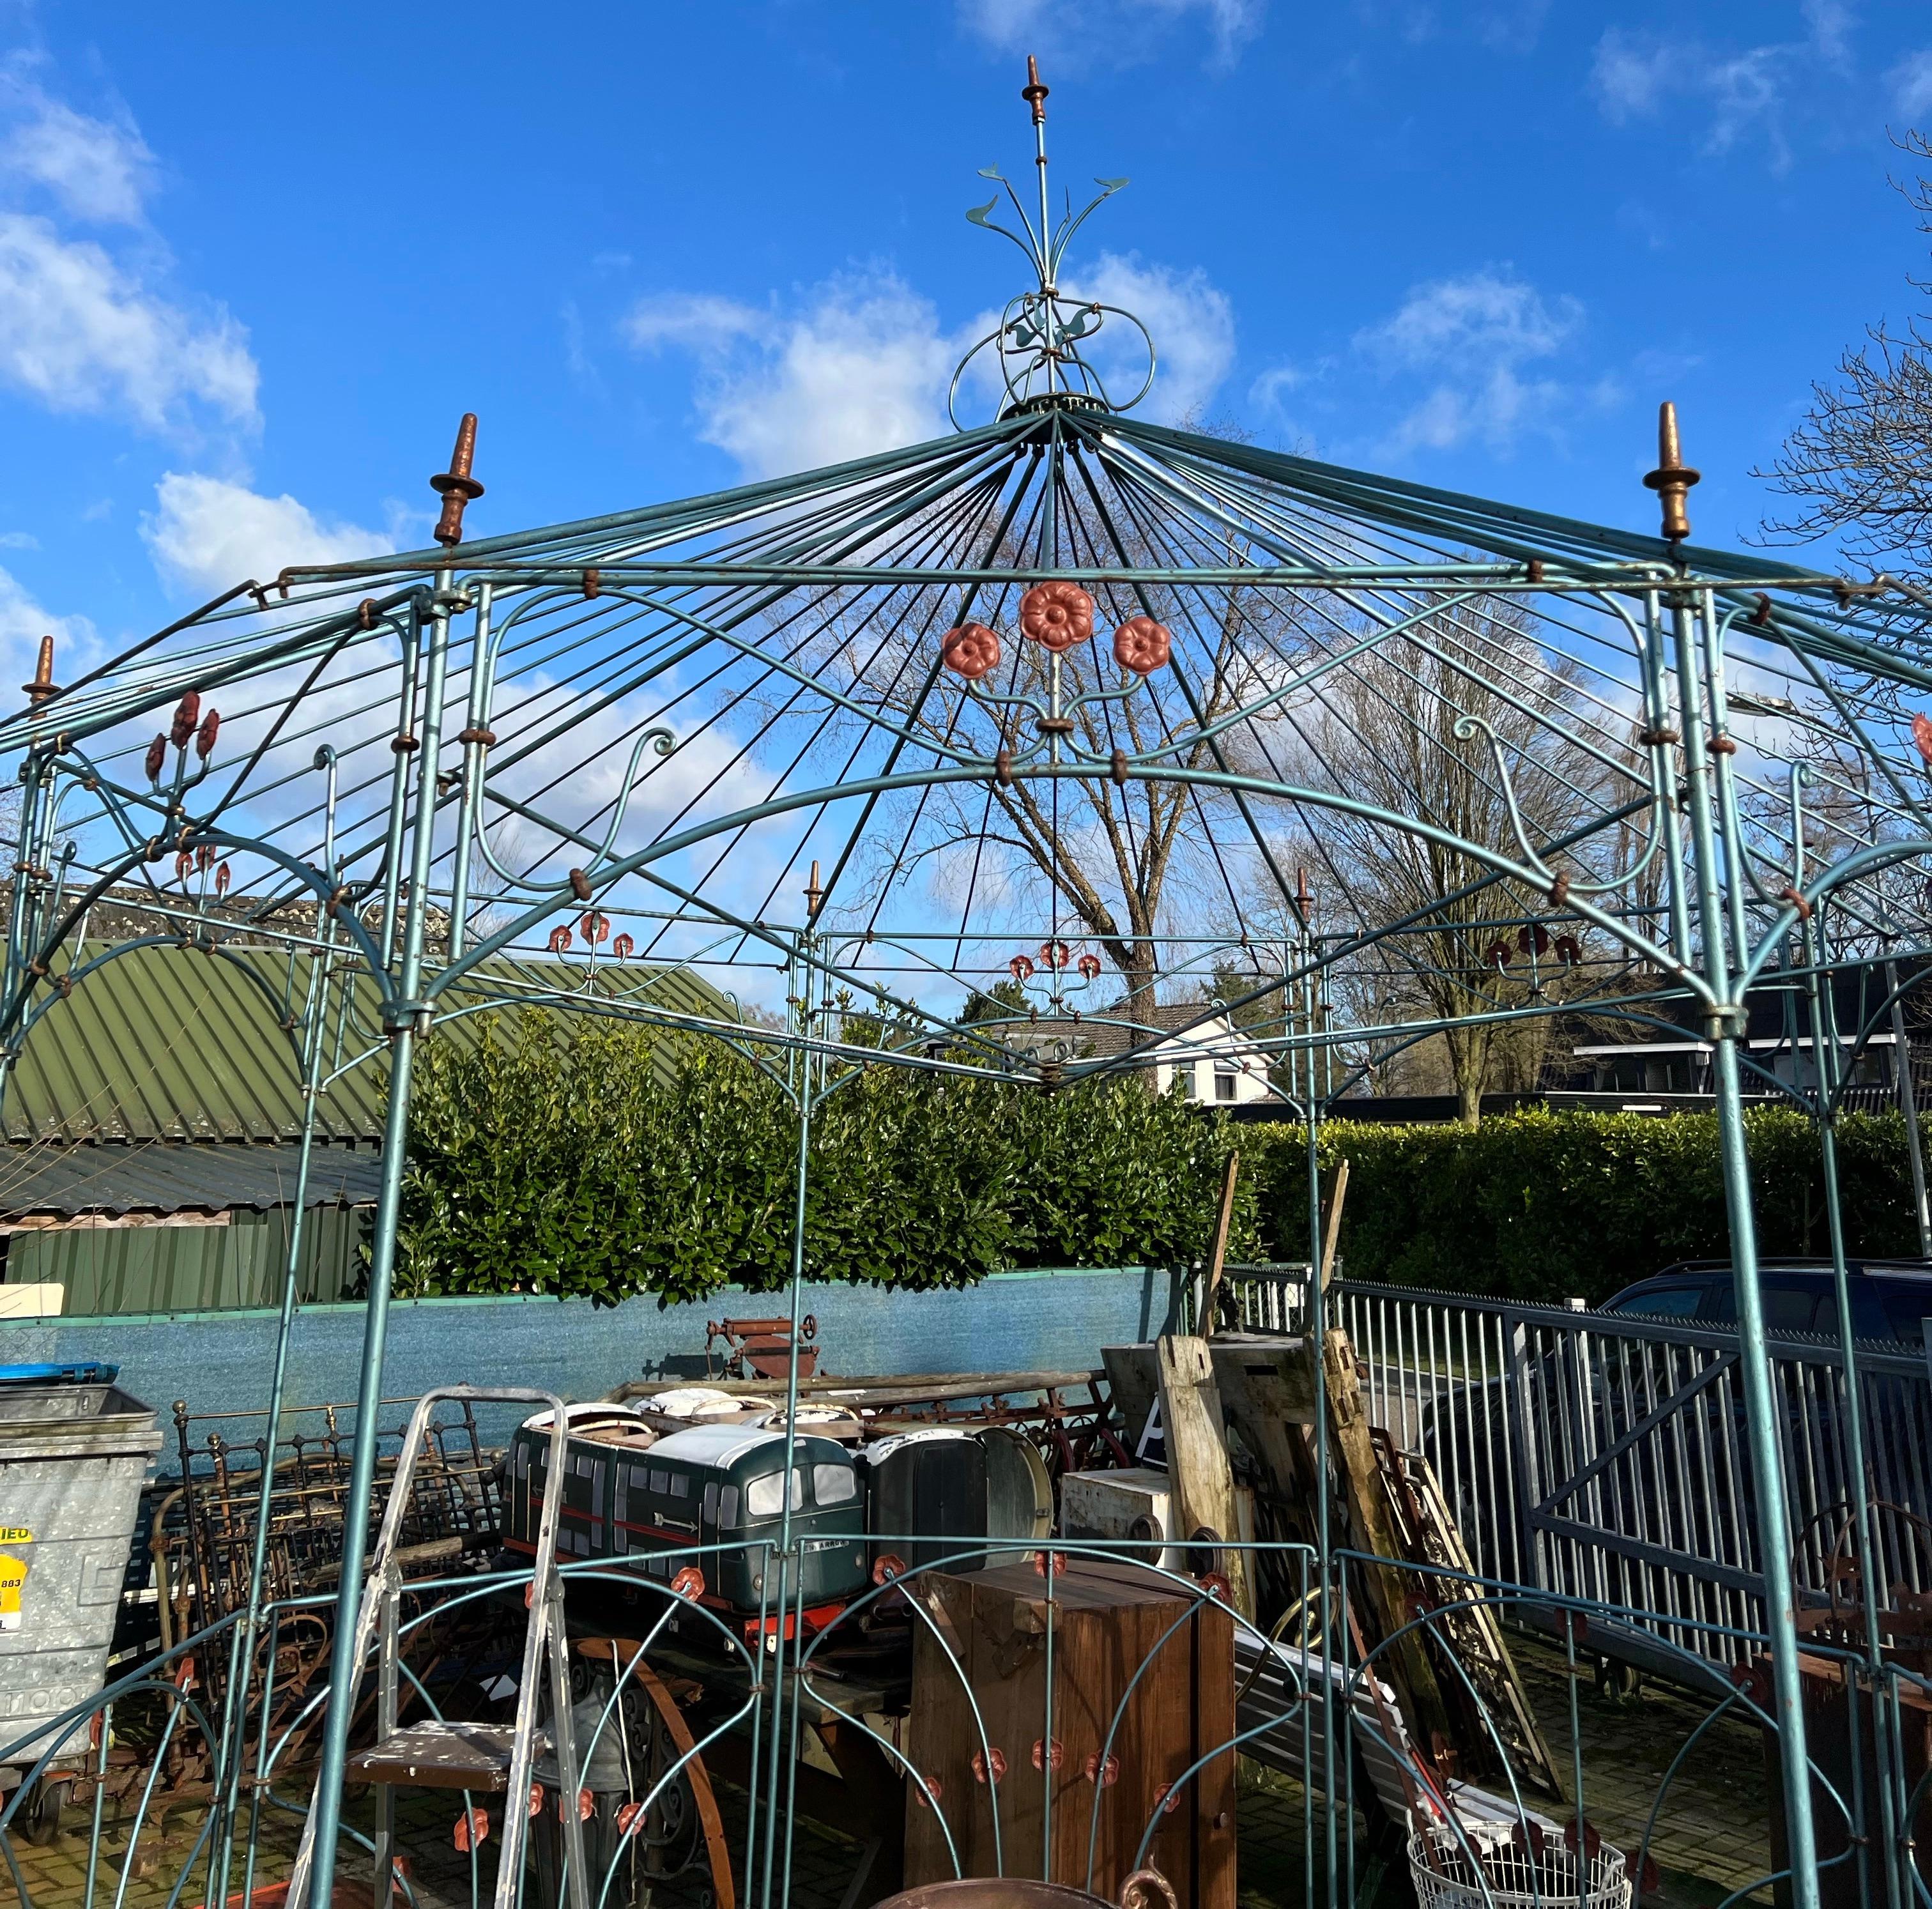 Blackened Antique & Large Hand-Forged Wrought Iron Art Nouveau Gazebo or Garden Gloriette For Sale